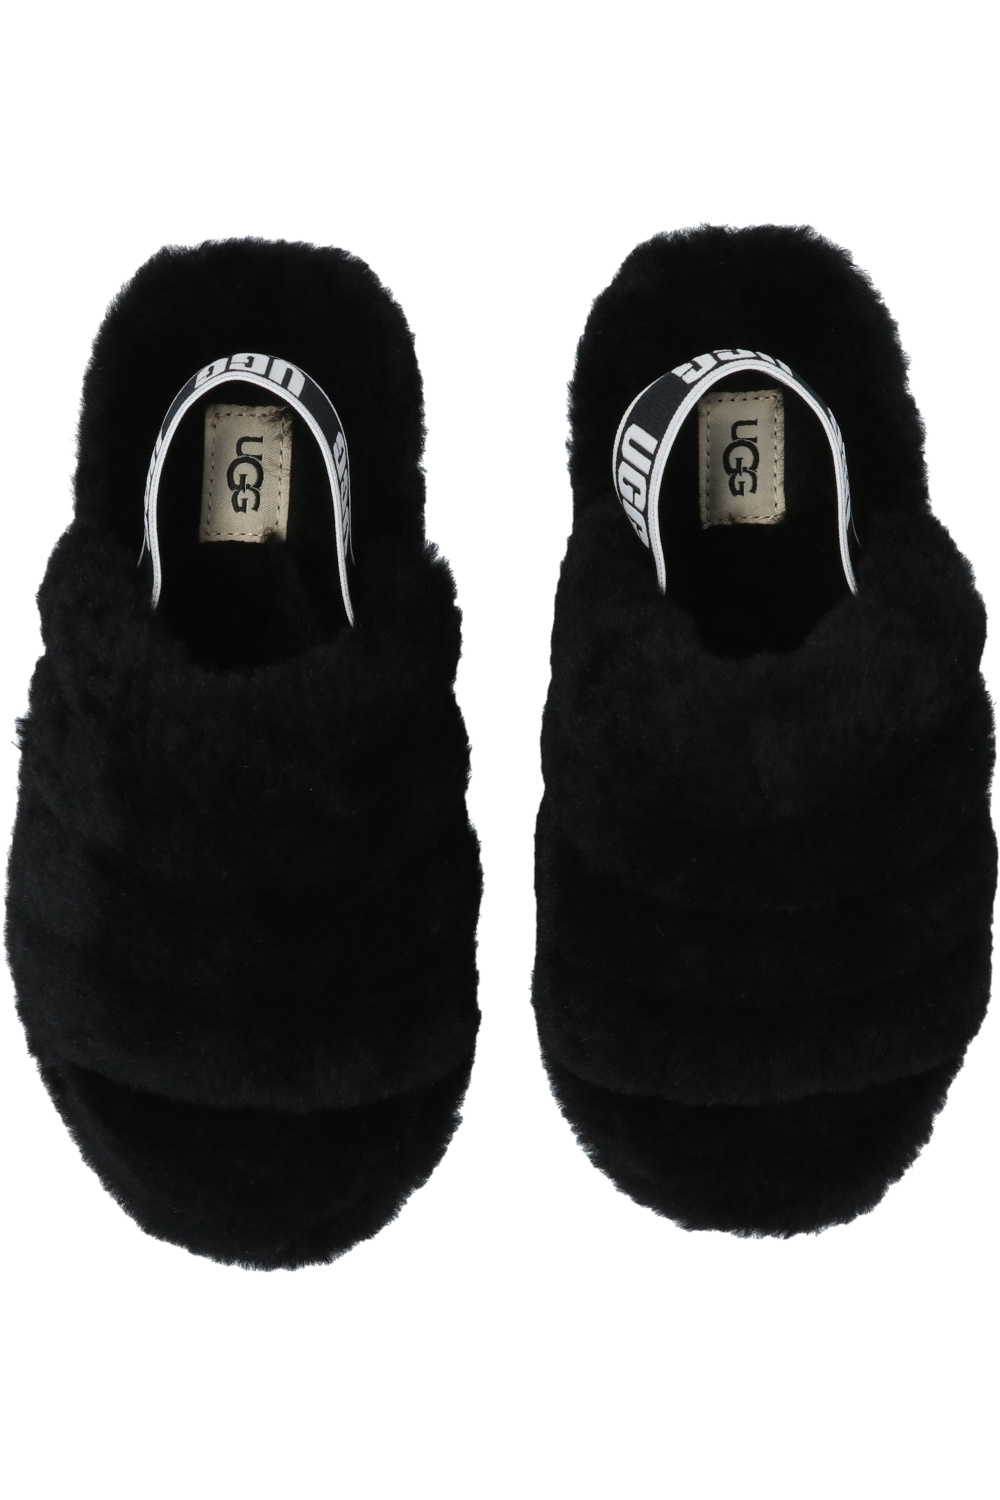 ugg Clth Kids ‘Fluff Yeah’ shearling sandals